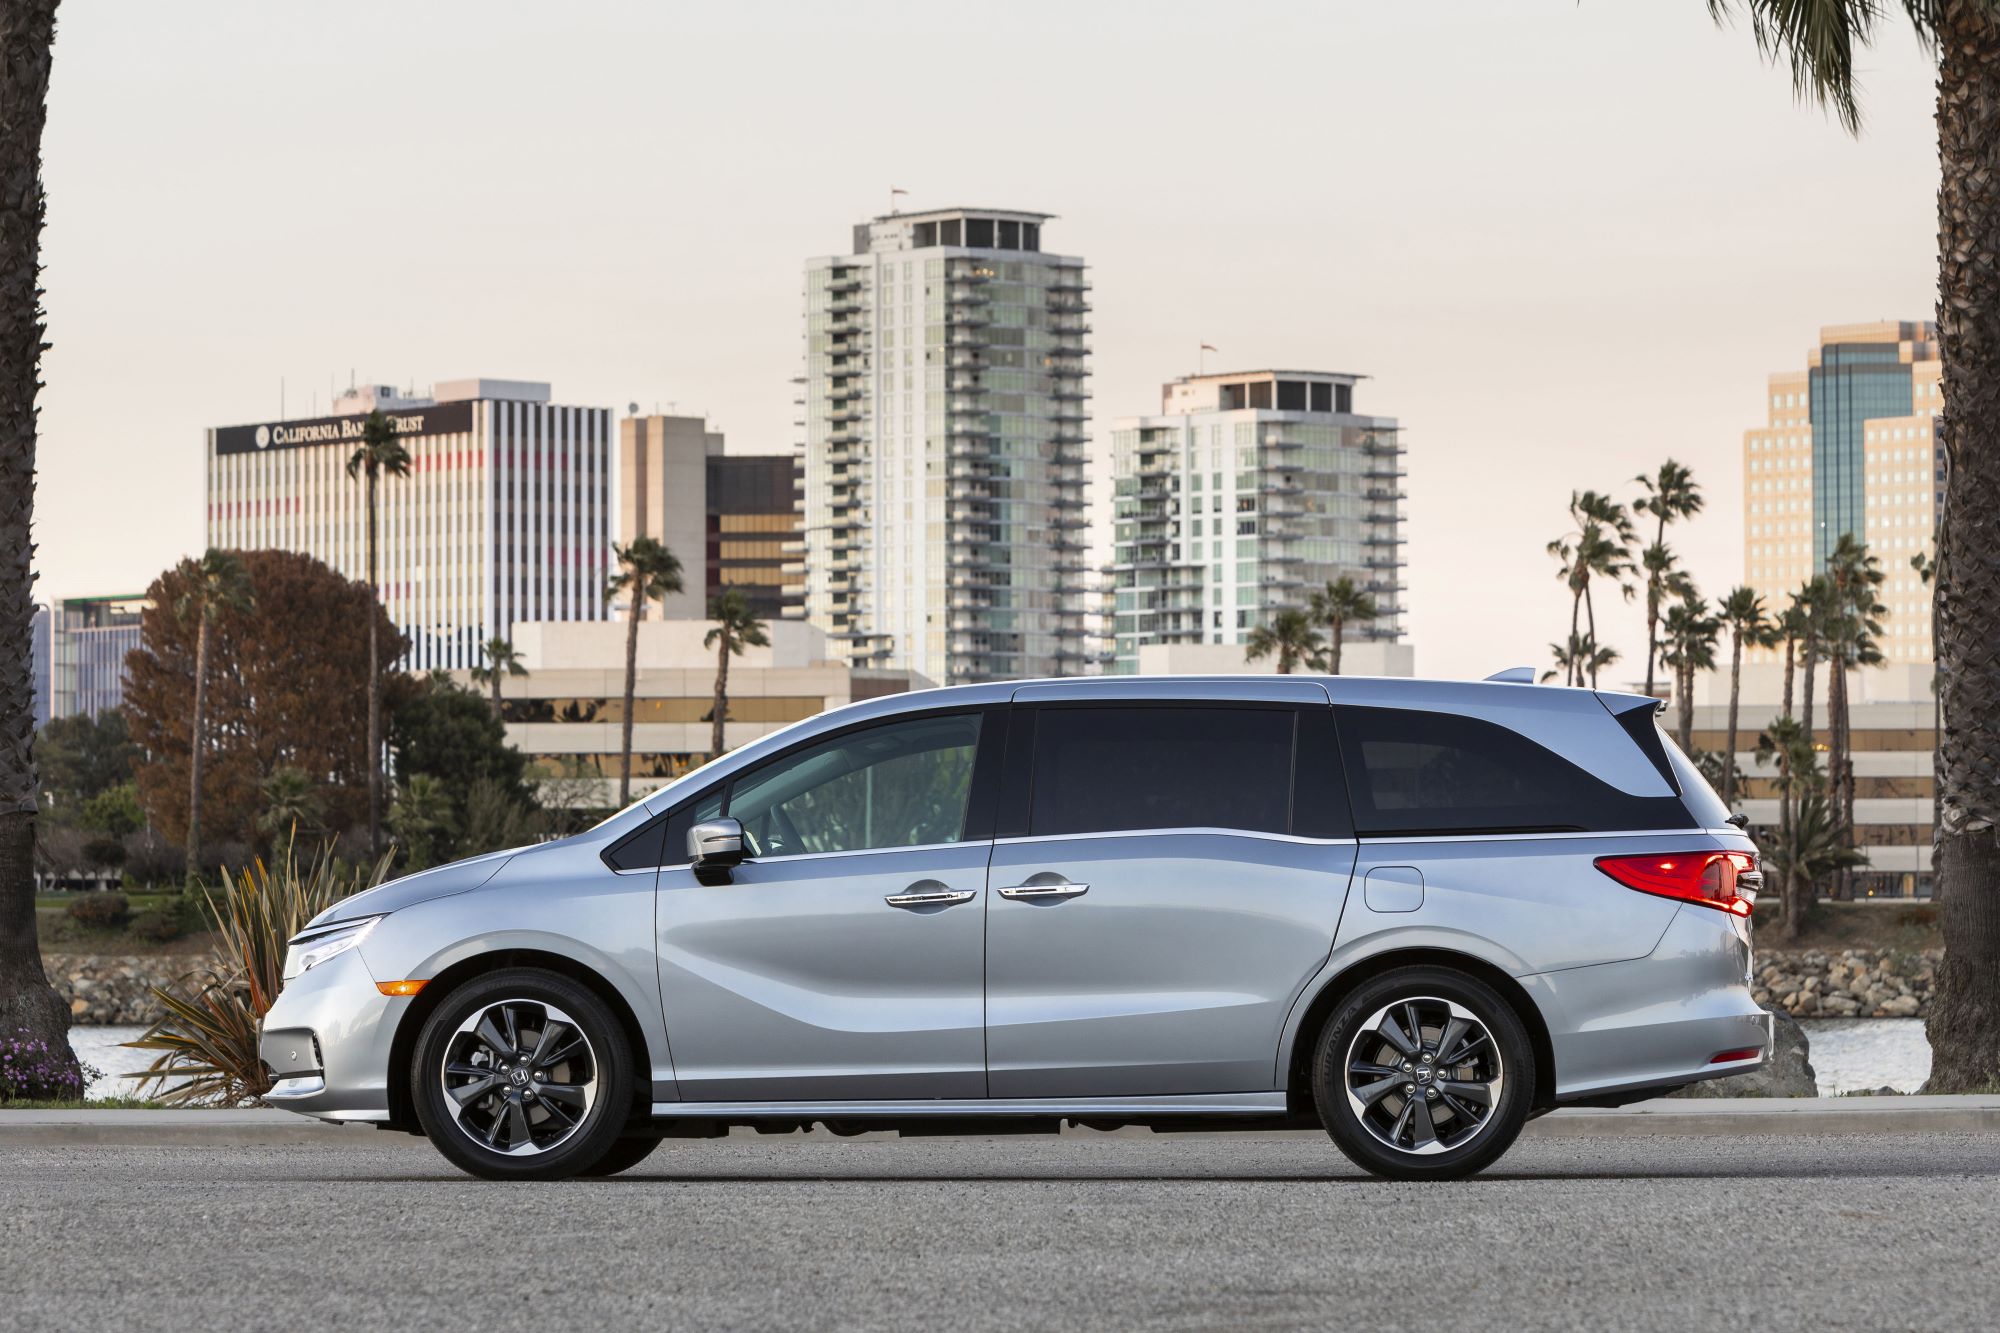 A silver Honda Odyssey in front of a city skyline.